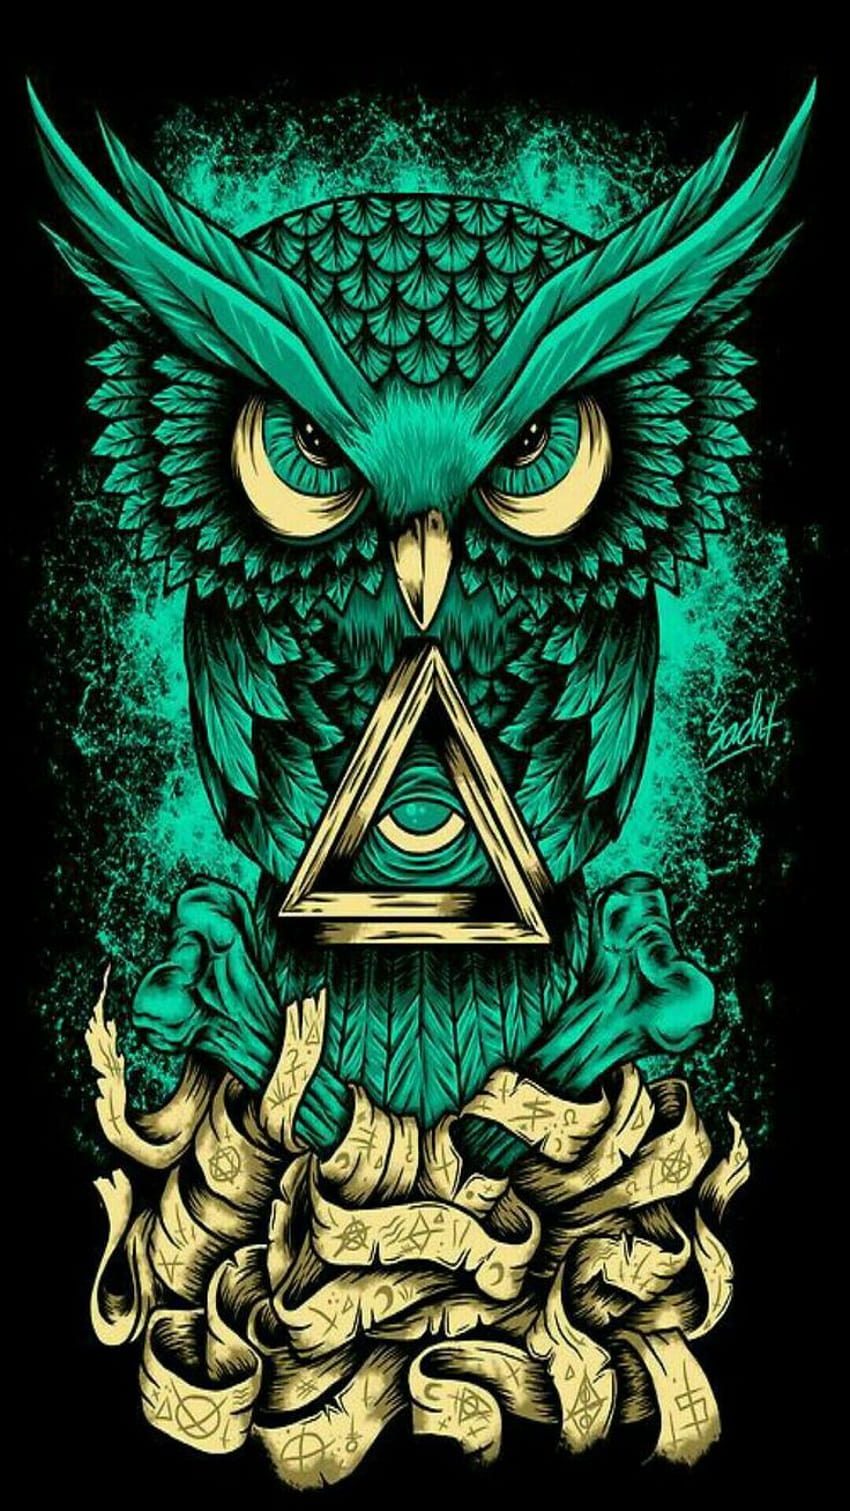 Xyei on Phone Backgrounds, trippy owl HD phone wallpaper